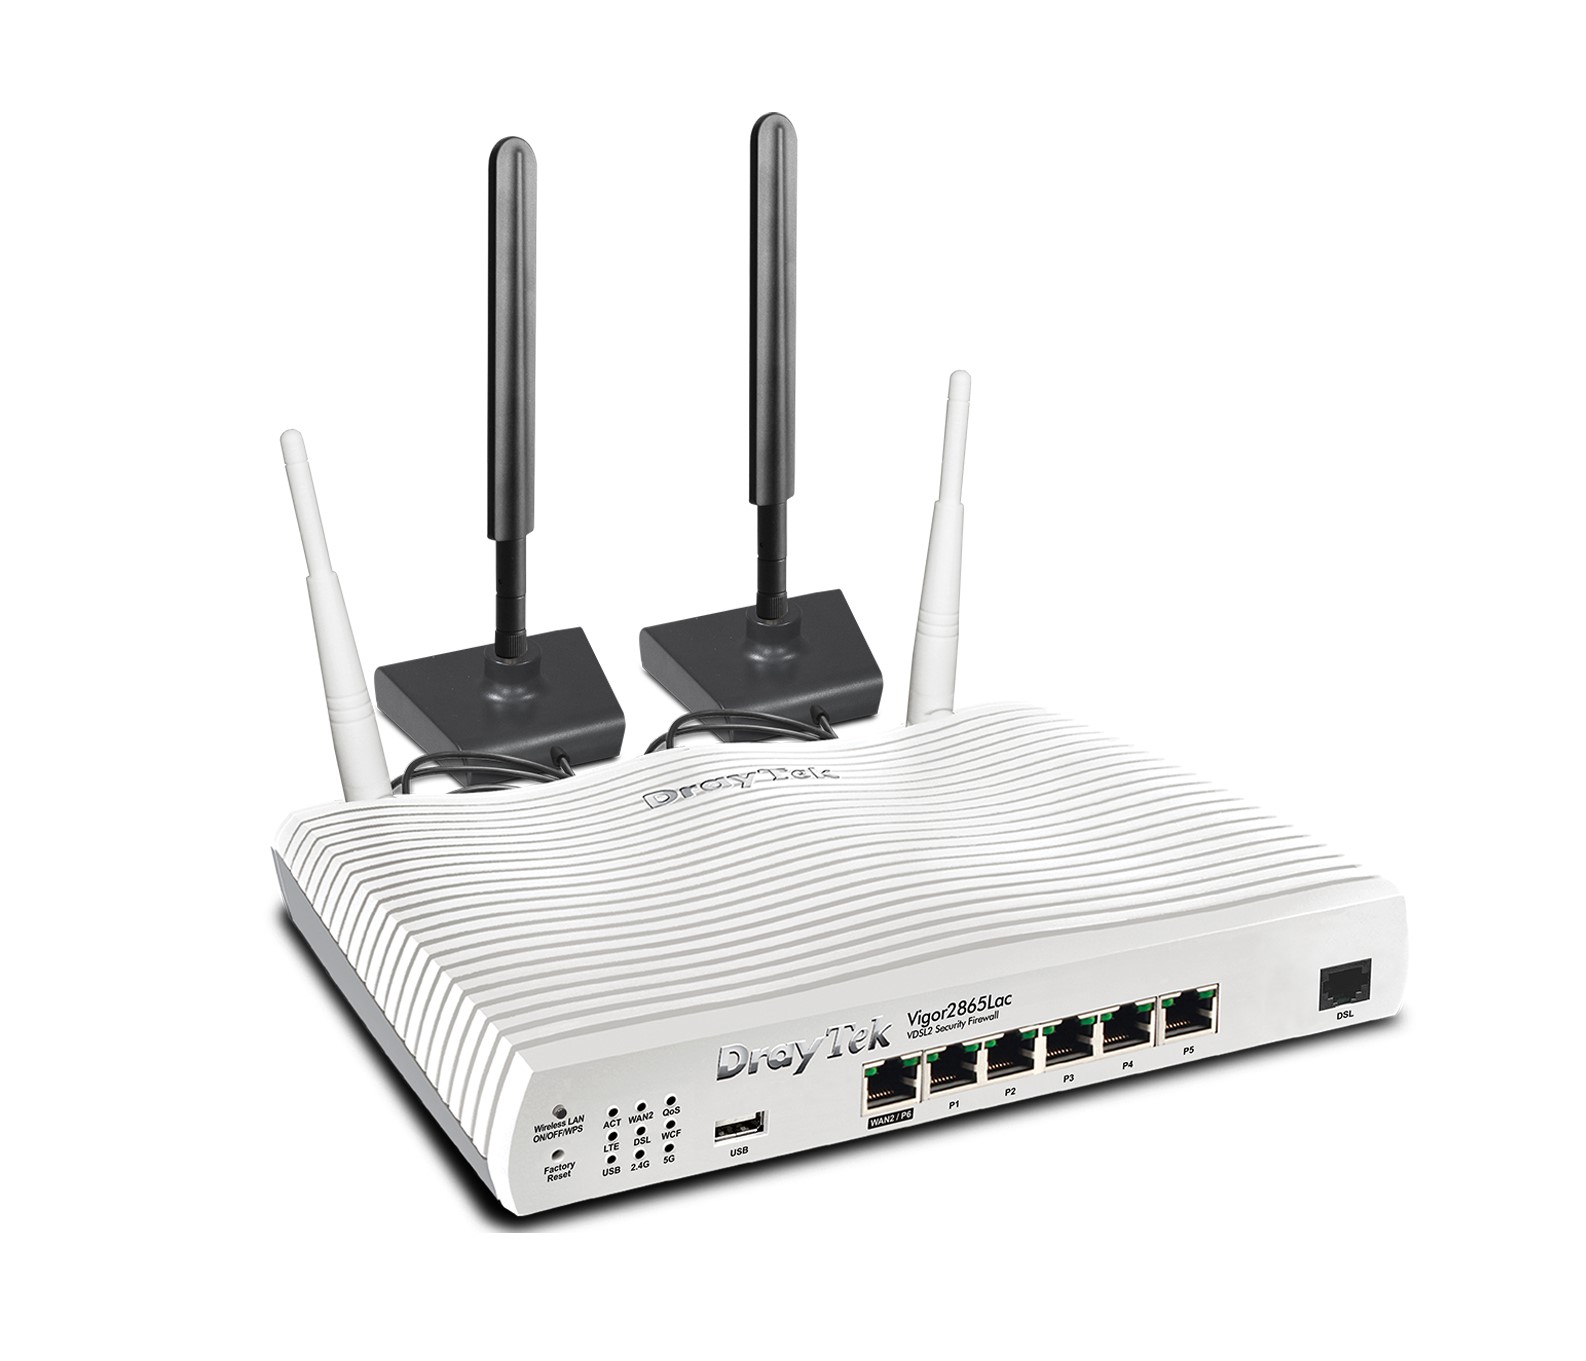  VDSL2 35b/ADSL2+ Multi WAN Router with a Cat6 4G LTE SIM slot, 1 x GbE WAN/LAN, and 3G/4G USB WAN port for Load Balancing and Fail-over, 5 x GbE LANs, Object-based SPI Firewall, CSM, QoS, 802.11ac (AC1300) WiFi, 32 x VPNs, 16 x SSL VPNs, and support VigorACS 2  